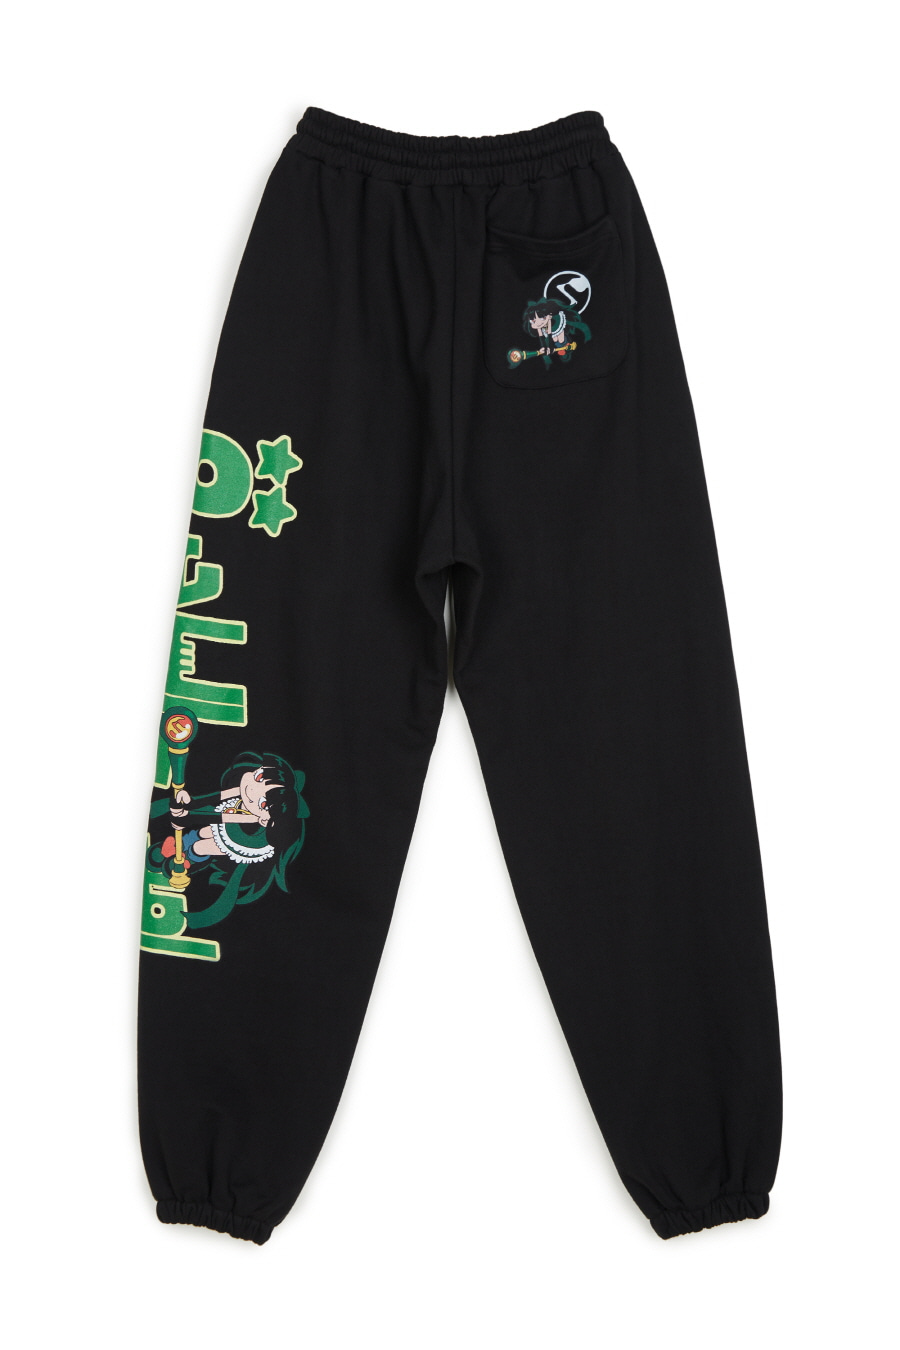 THE WITCH Heavy Weight Fleece Sweat Pants - Black